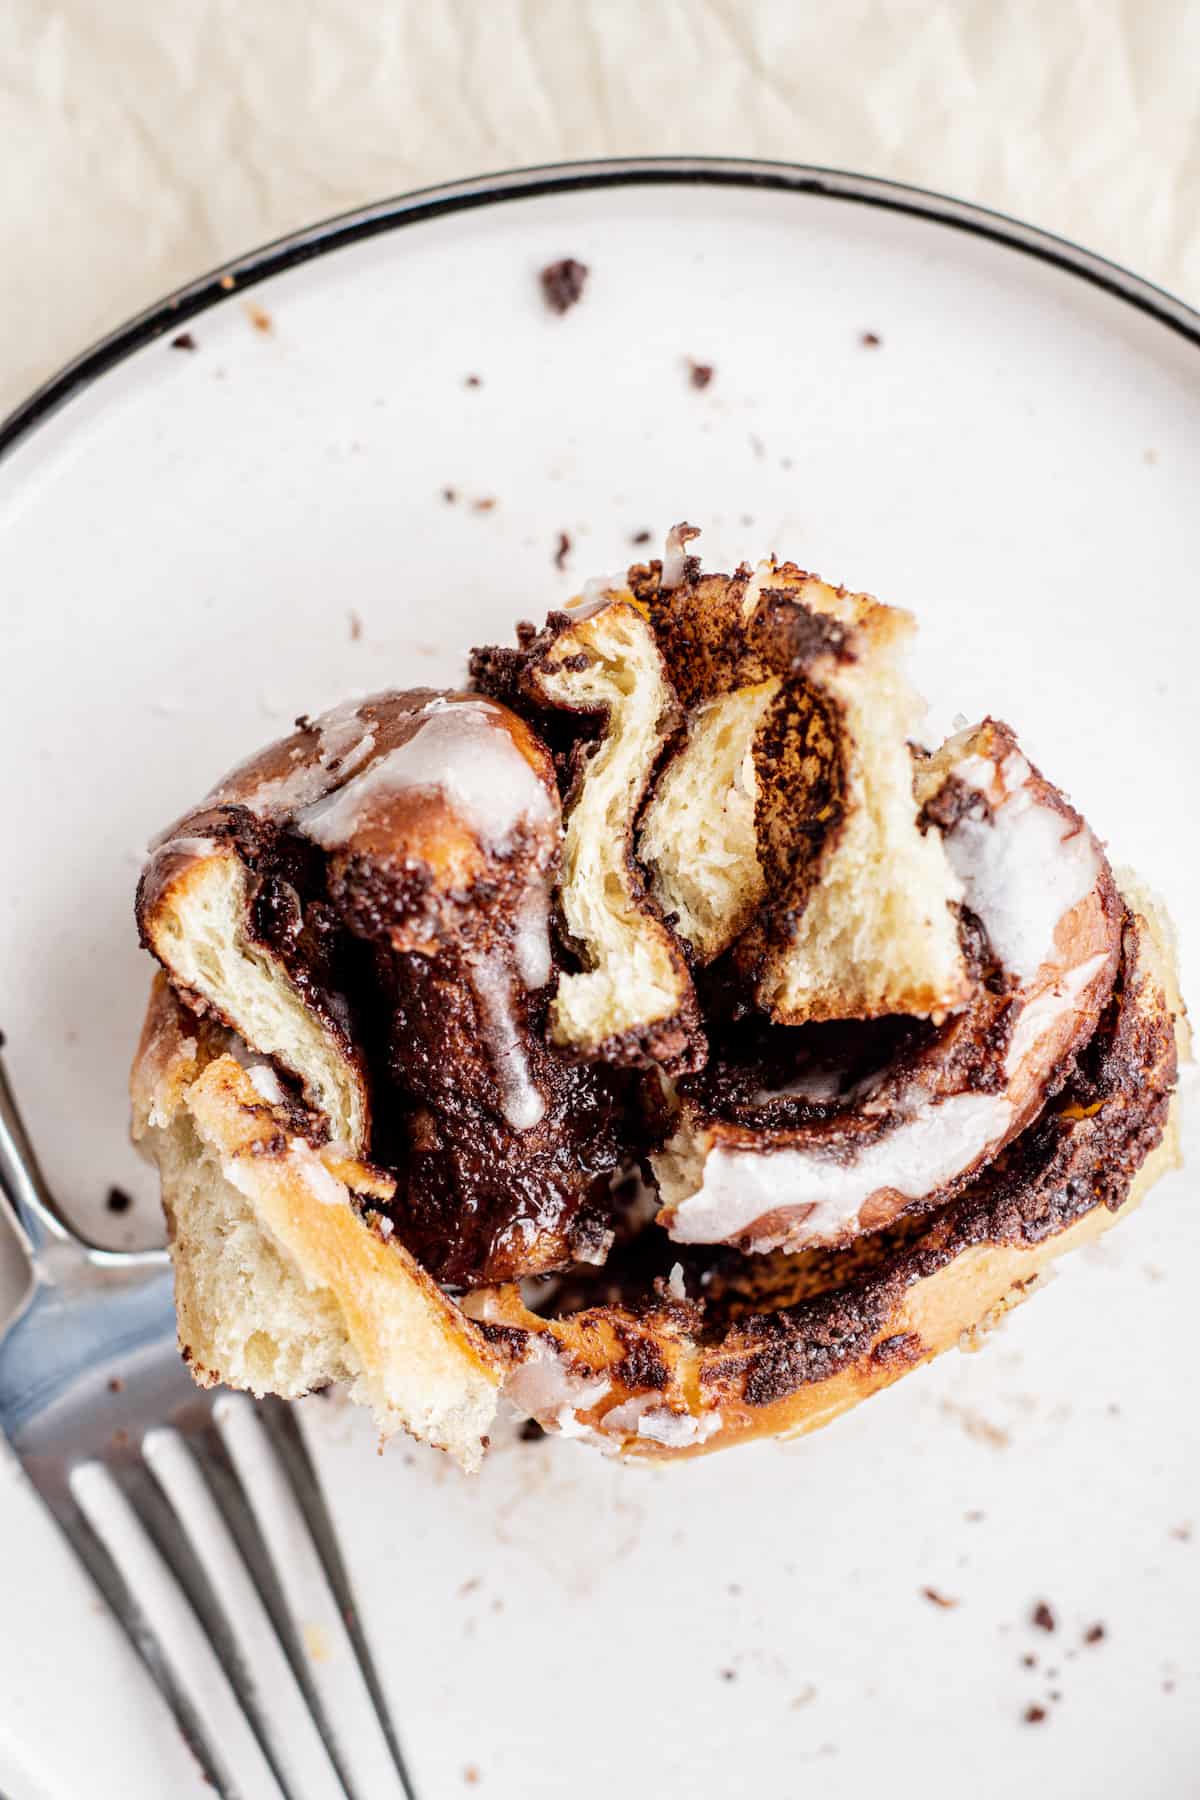 close up of chocolate cinnamon roll on a plate.